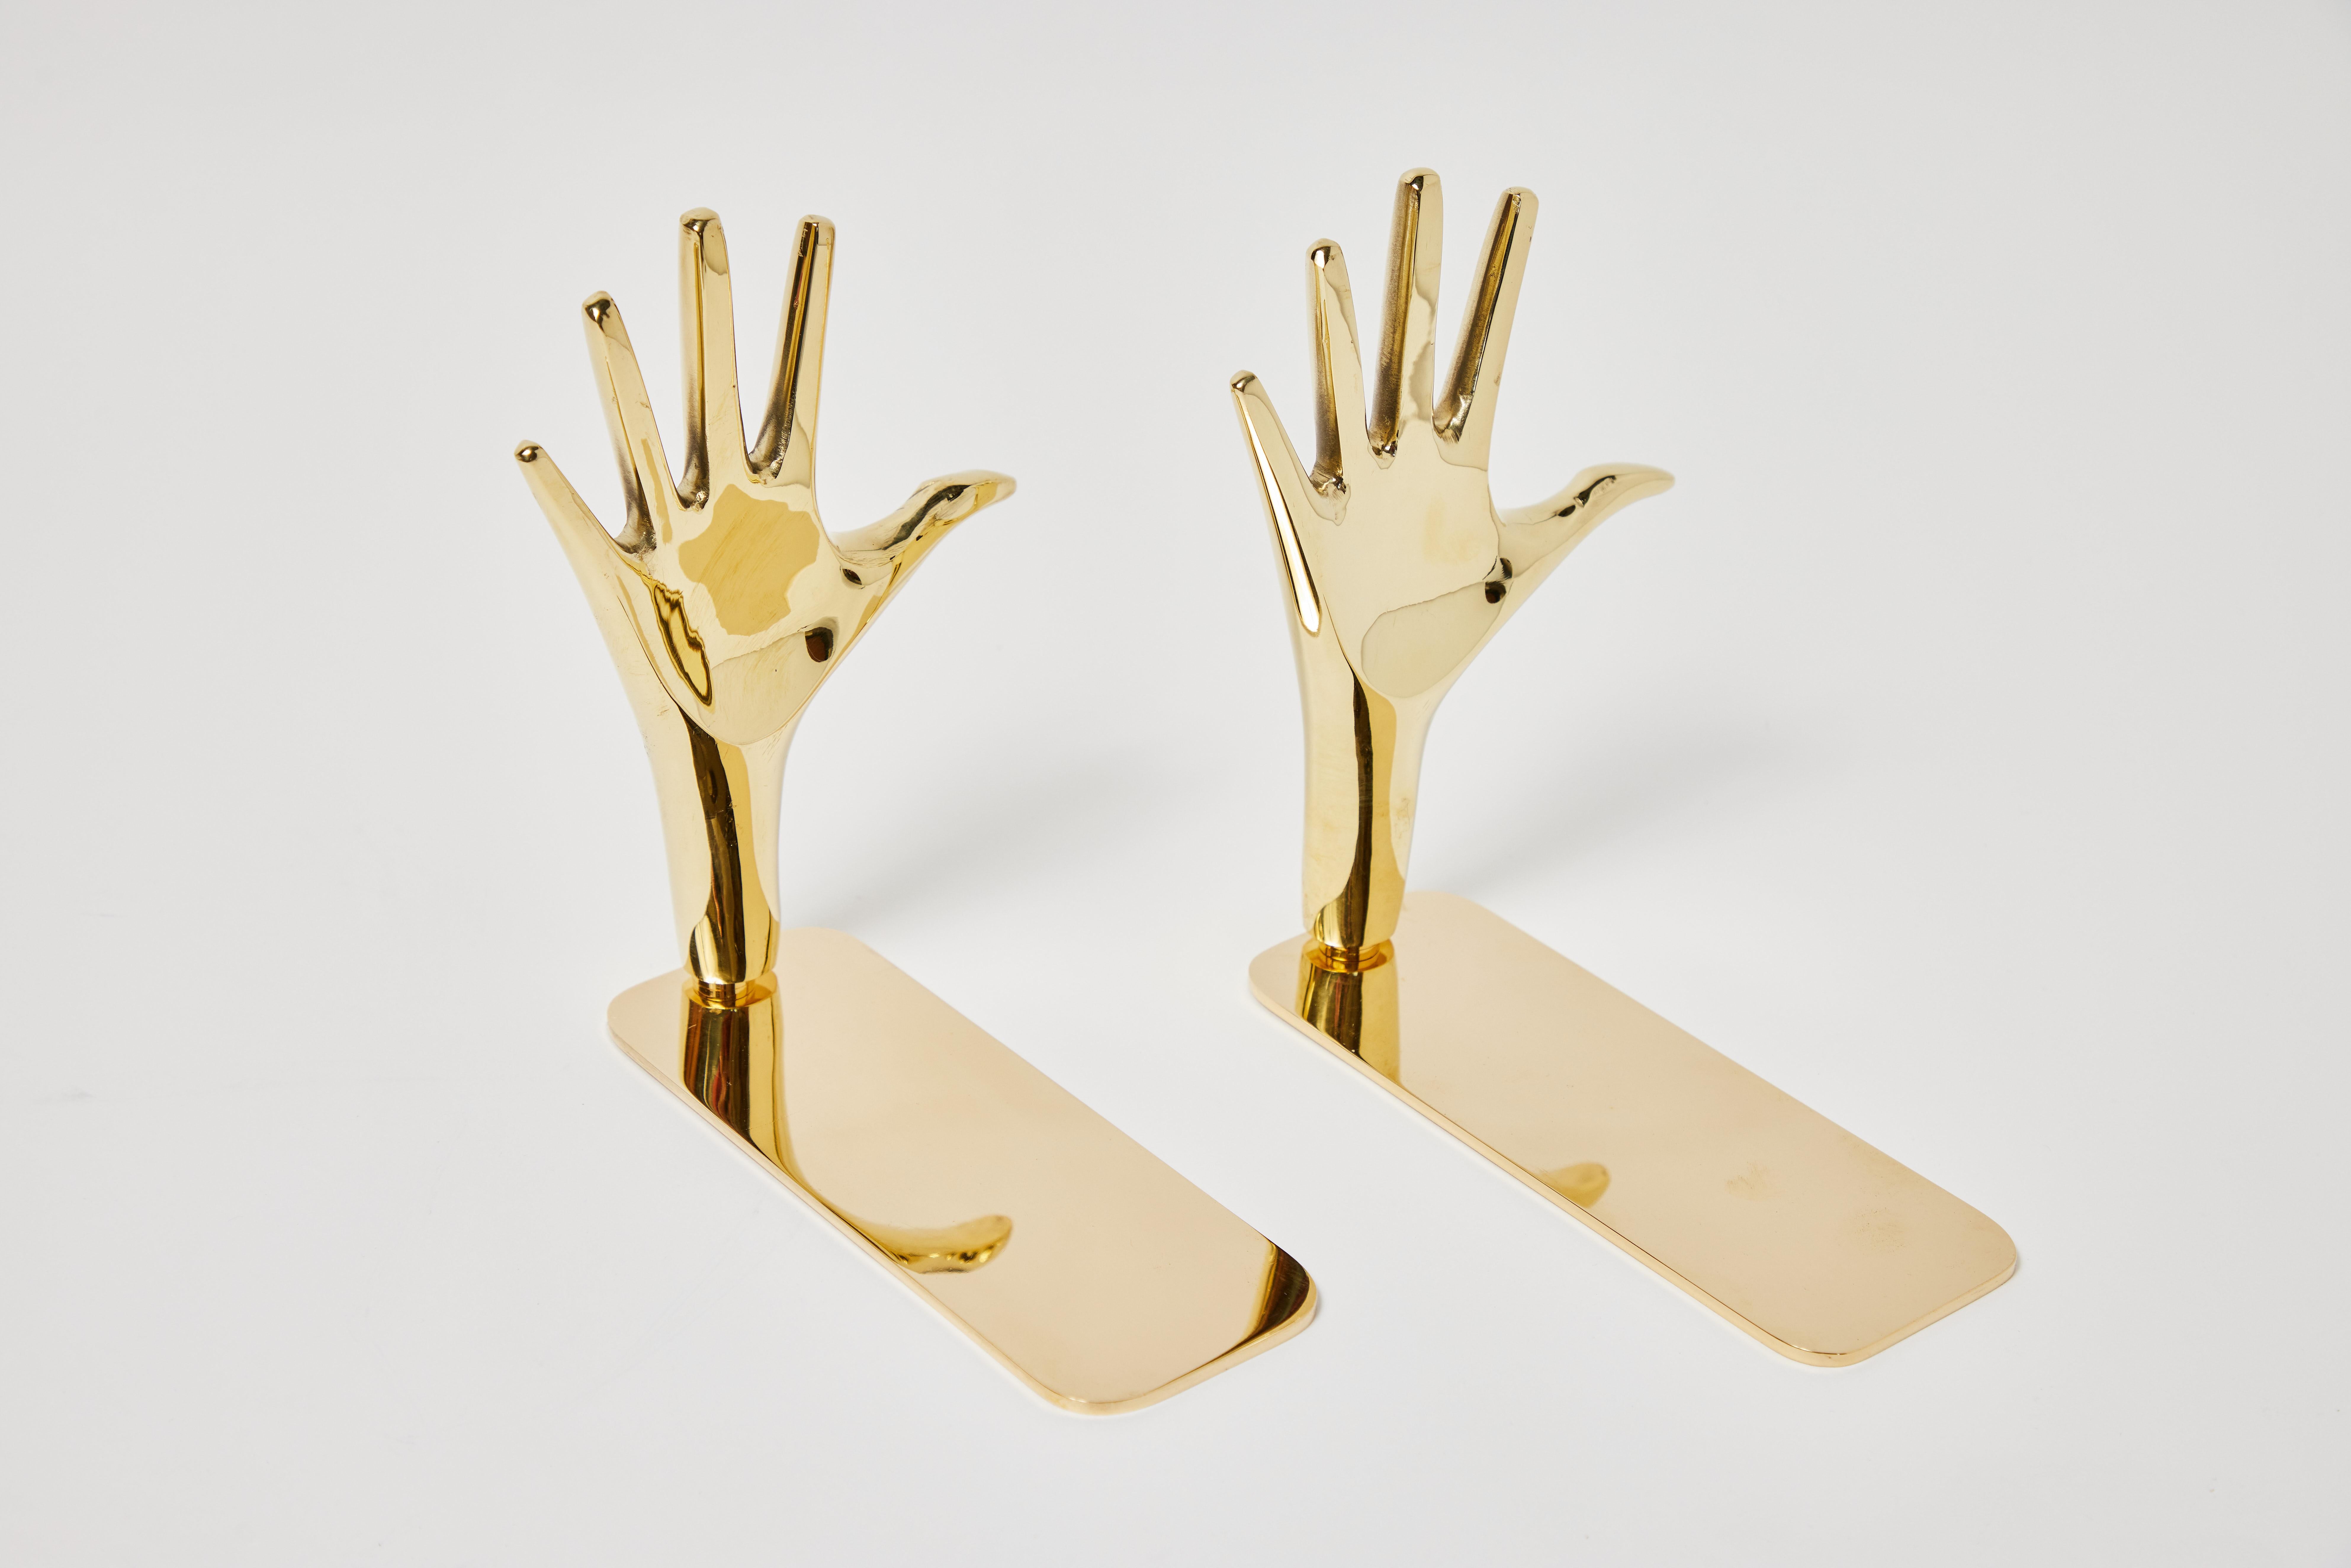 Pair of Large Carl Auböck Model #4219 'Hands' Brass Bookends For Sale 4